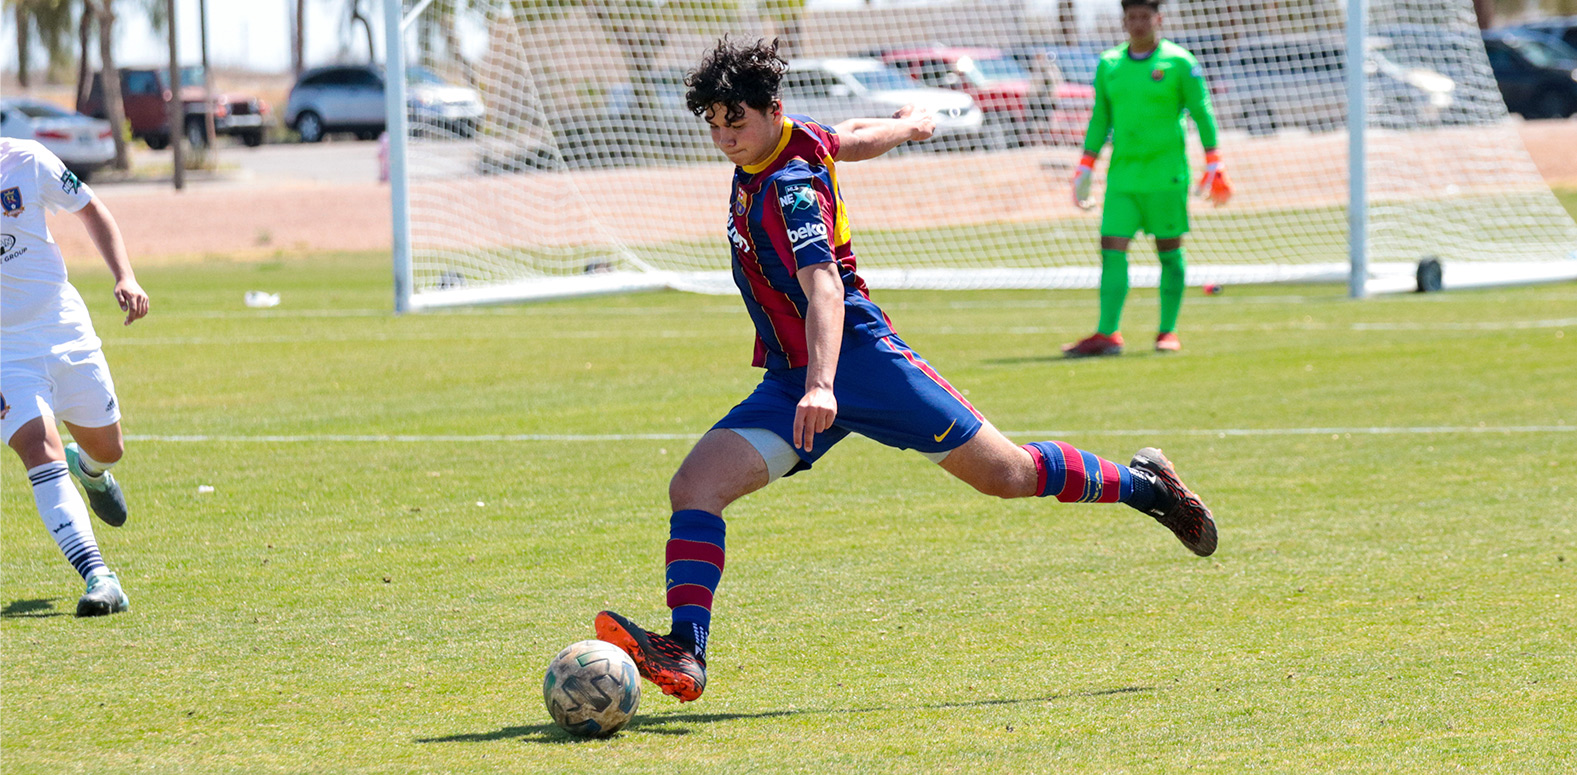 Barca Residency Academy MLS NEXT Teams Unbeaten for 2nd Gameday